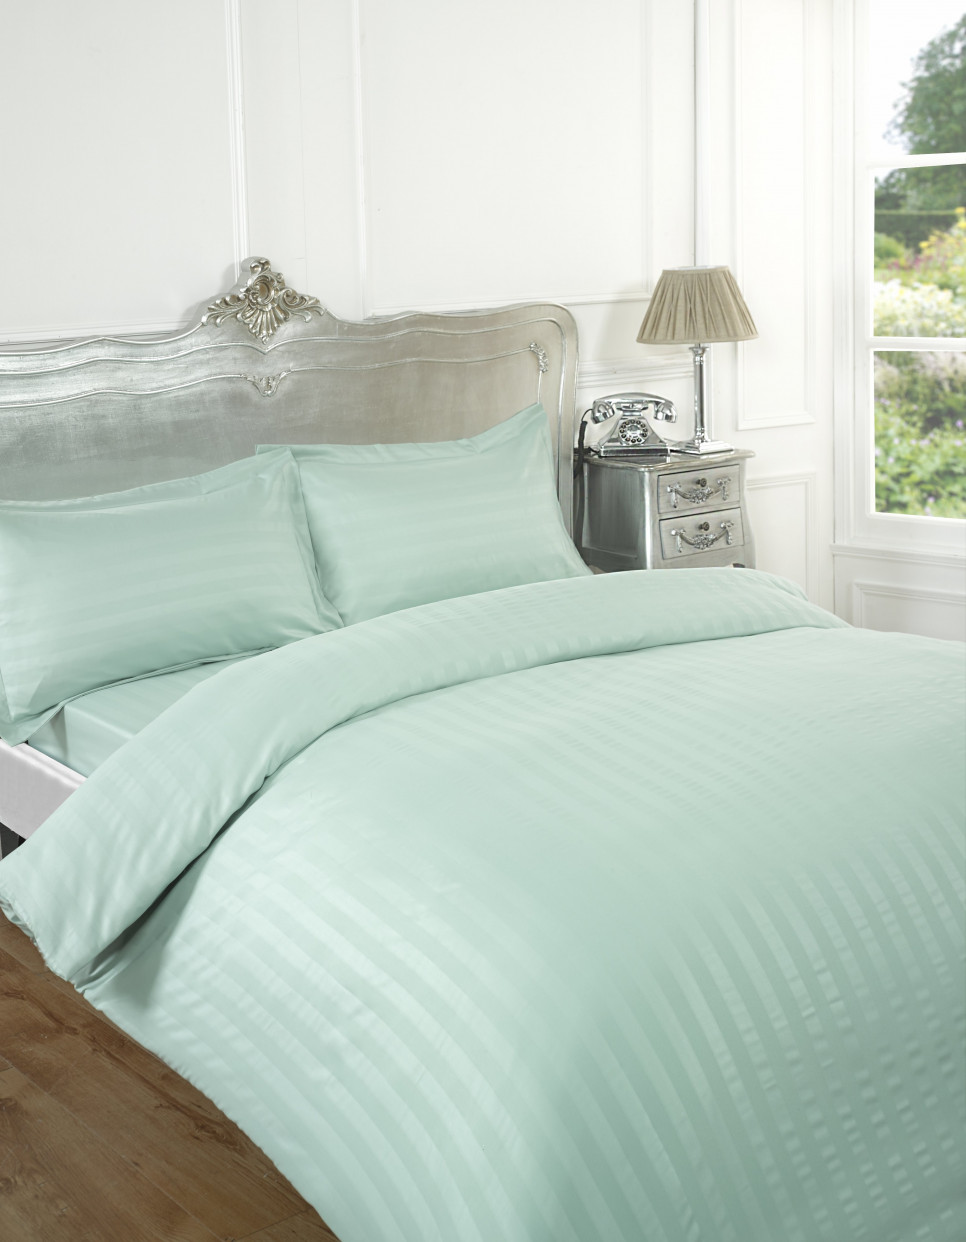 Dreamscene Complete Duvet Cover with Pillowcases Fitted Sheet Sateen Stripe - Duck Egg - King Size>